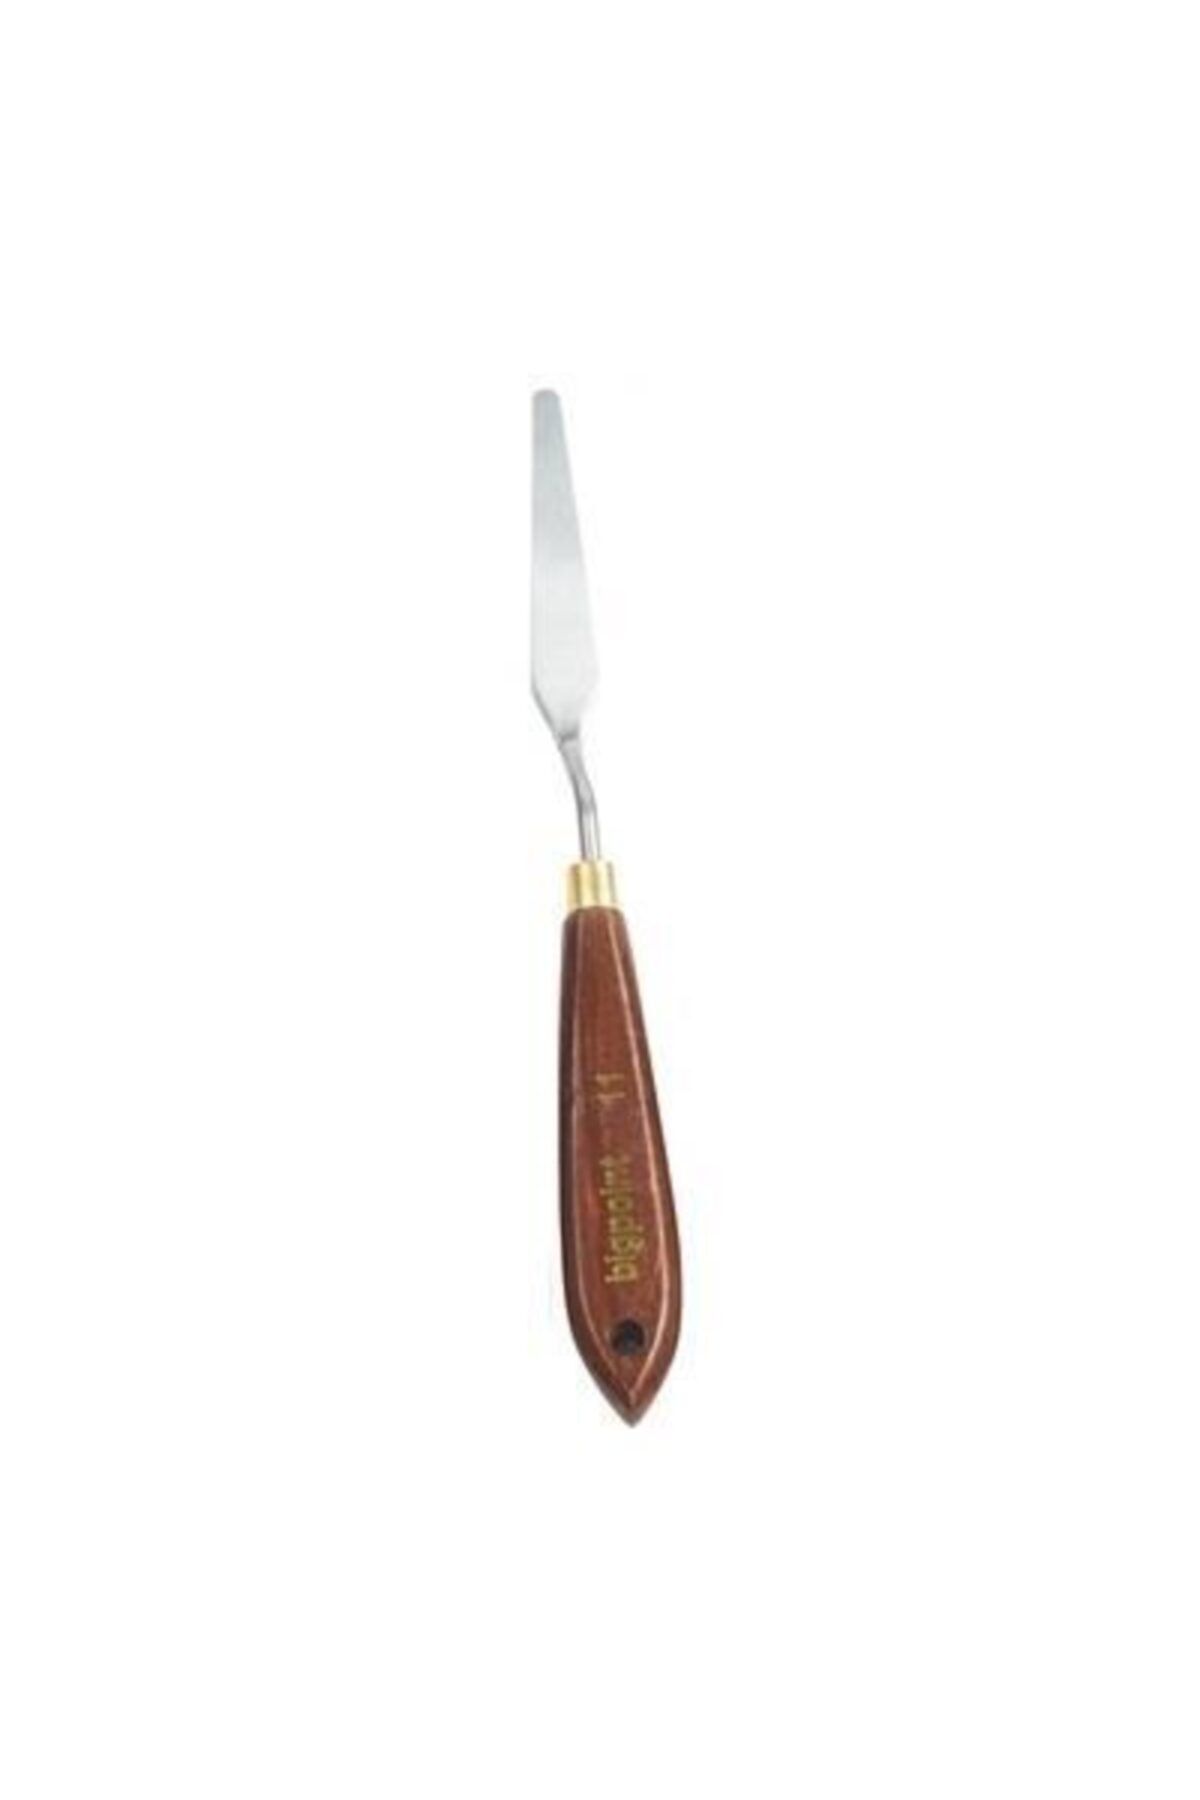 Bigpoint Metal Spatula No: 11 (Painting Knife)